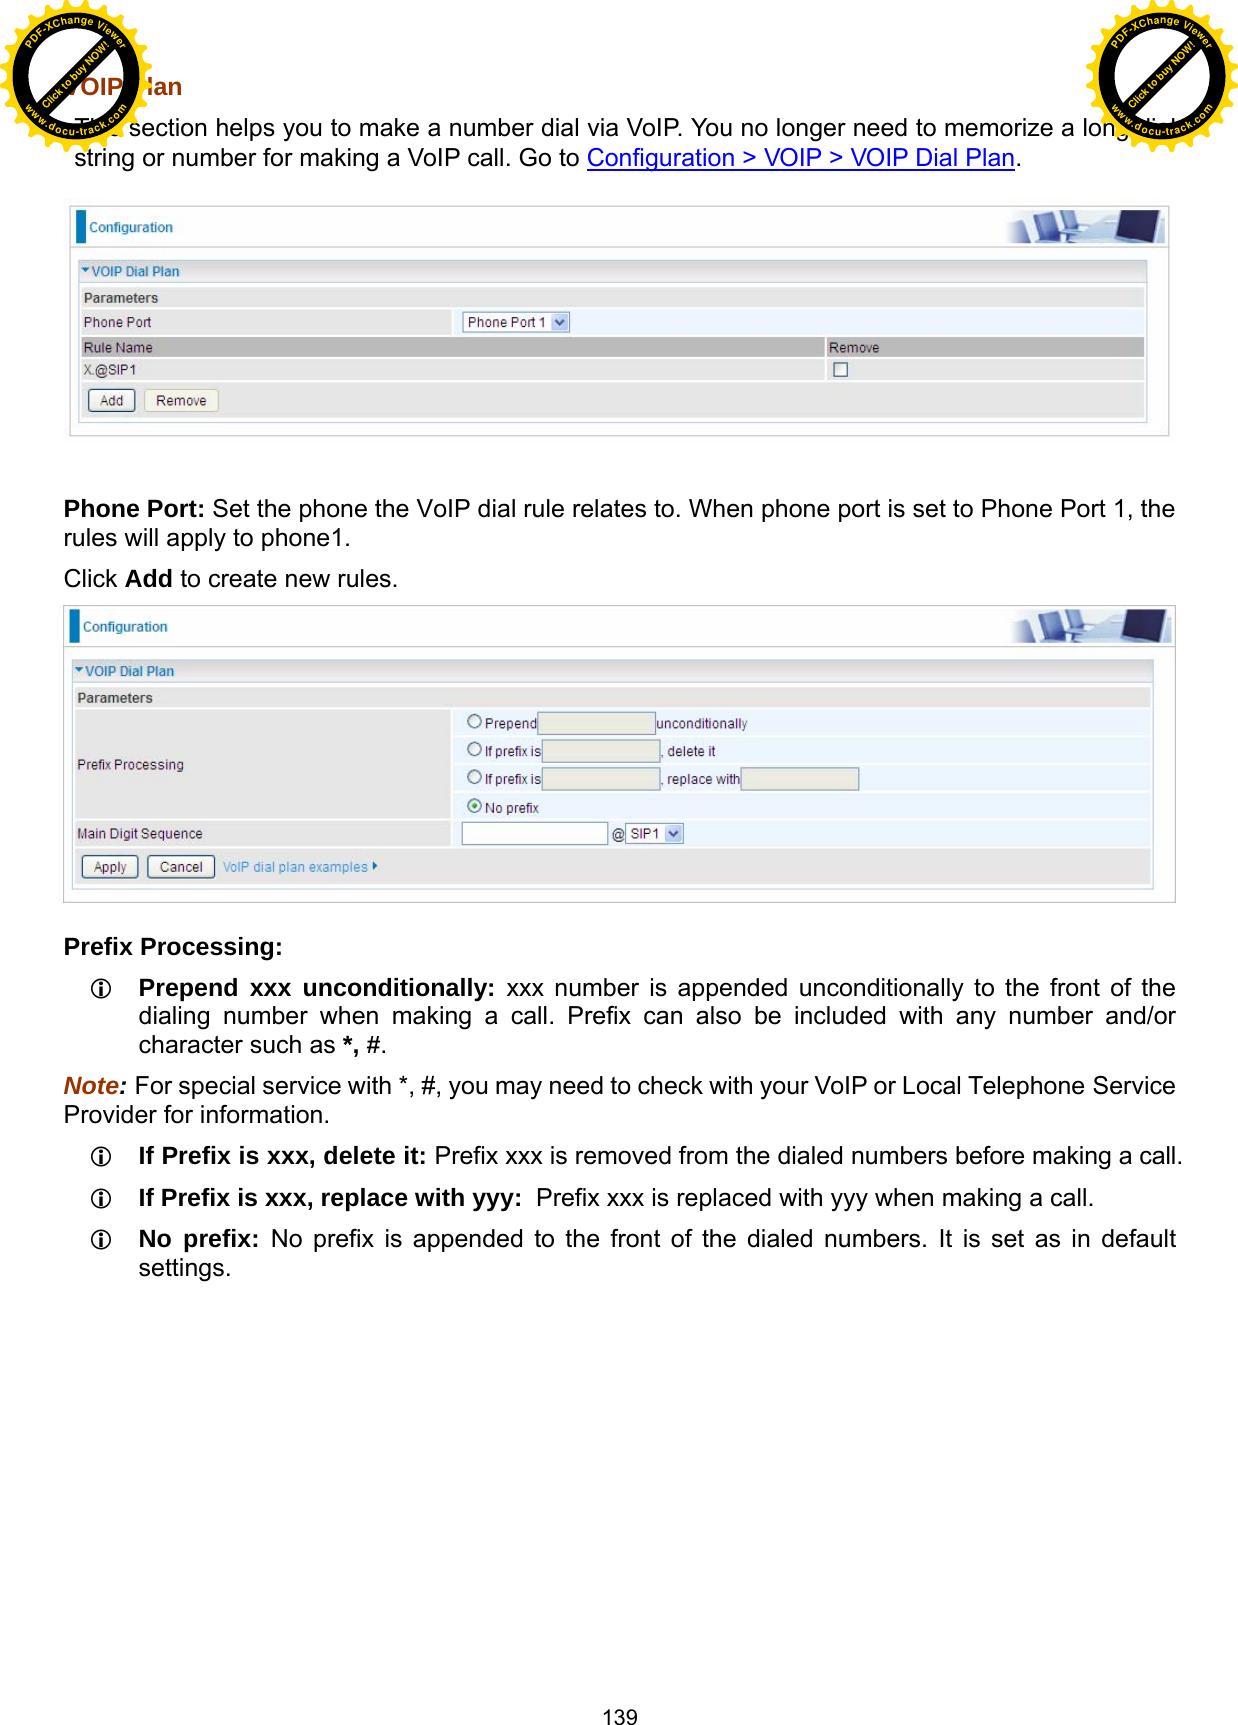  139 VOIP Plan  This section helps you to make a number dial via VoIP. You no longer need to memorize a long dial string or number for making a VoIP call. Go to Configuration &gt; VOIP &gt; VOIP Dial Plan.    Phone Port: Set the phone the VoIP dial rule relates to. When phone port is set to Phone Port 1, the rules will apply to phone1. Click Add to create new rules.   Prefix Processing:  Prepend xxx unconditionally: xxx number is appended unconditionally to the front of the dialing number when making a call. Prefix can also be included with any number and/or character such as *, #. Note: For special service with *, #, you may need to check with your VoIP or Local Telephone Service Provider for information.  If Prefix is xxx, delete it: Prefix xxx is removed from the dialed numbers before making a call.  If Prefix is xxx, replace with yyy:  Prefix xxx is replaced with yyy when making a call.  No prefix: No prefix is appended to the front of the dialed numbers. It is set as in default settings. Click to buy NOW!PDF-XChange Viewerwww.docu-track.comClick to buy NOW!PDF-XChange Viewerwww.docu-track.com